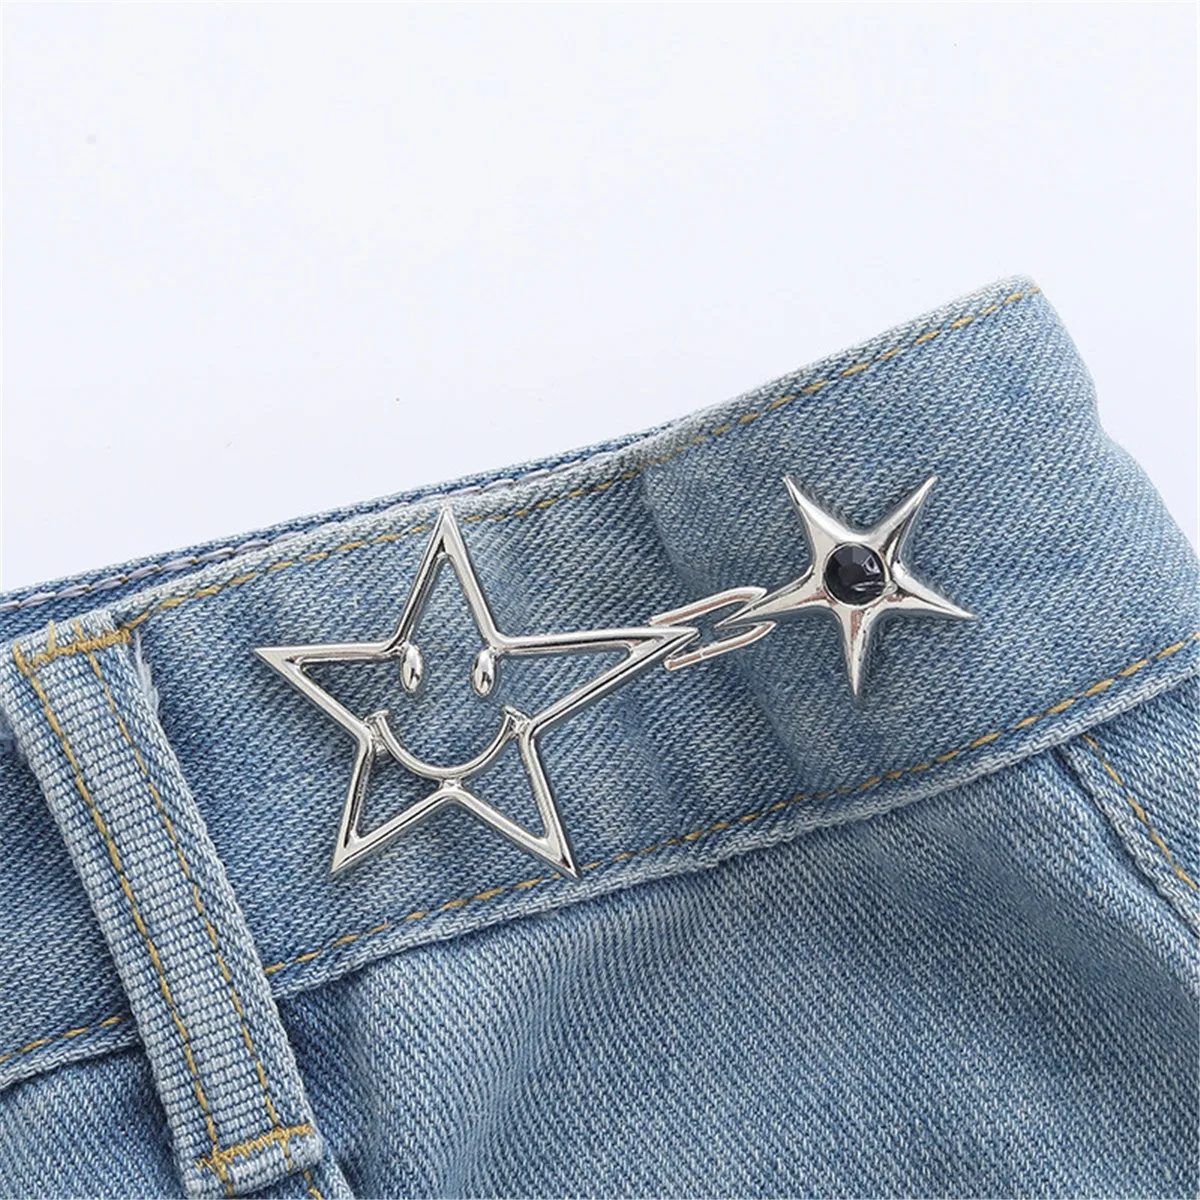 1PCS Jeans Button Adjuster for Pants and Skirts No Sewing Required Waist Tightener Adjustable Waist Buckle